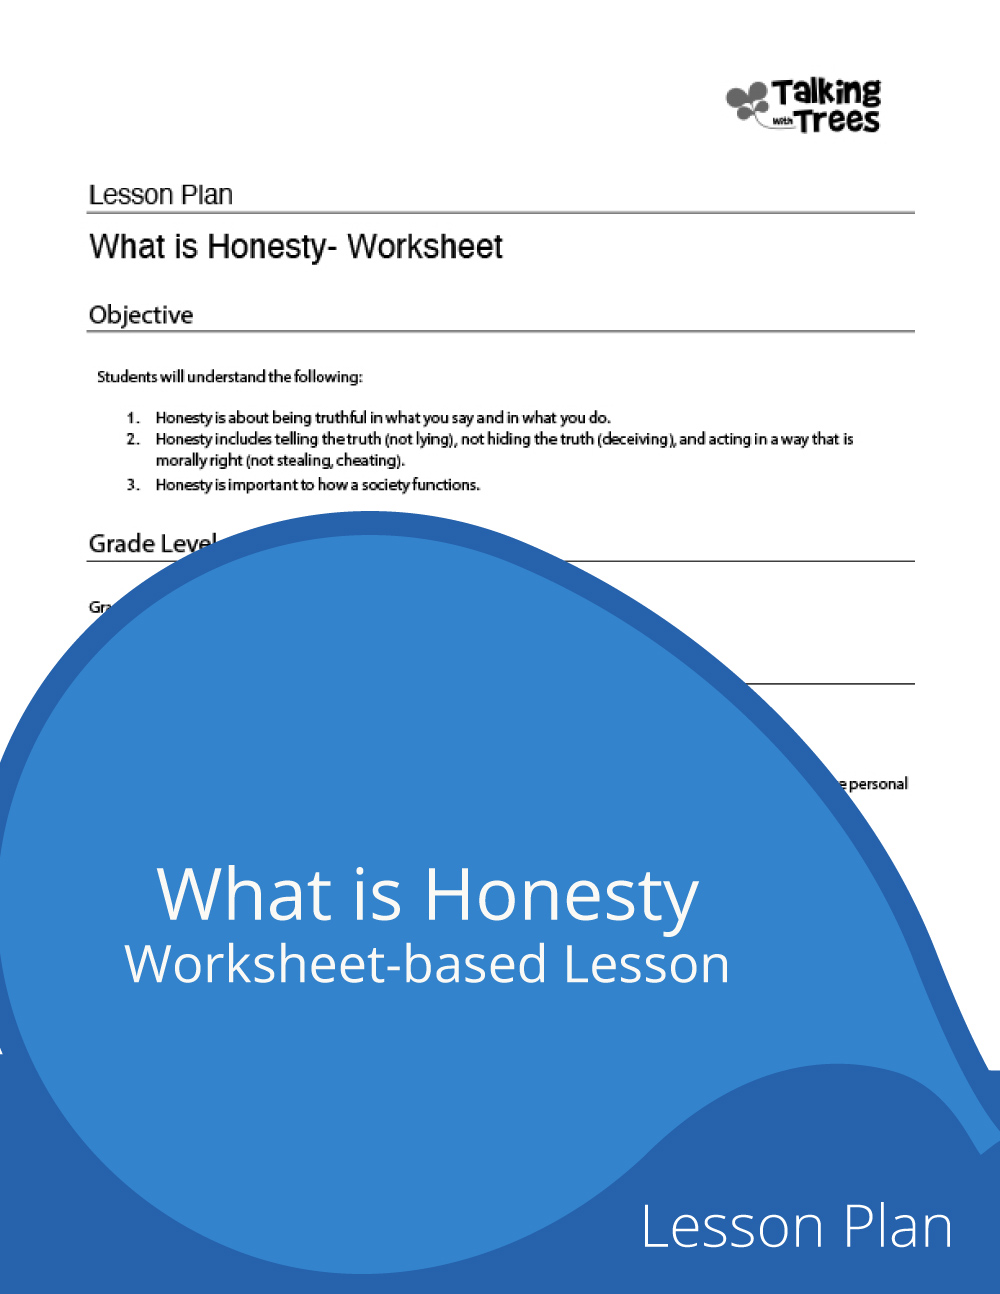 What is honesty lesson plan for social emotional learning